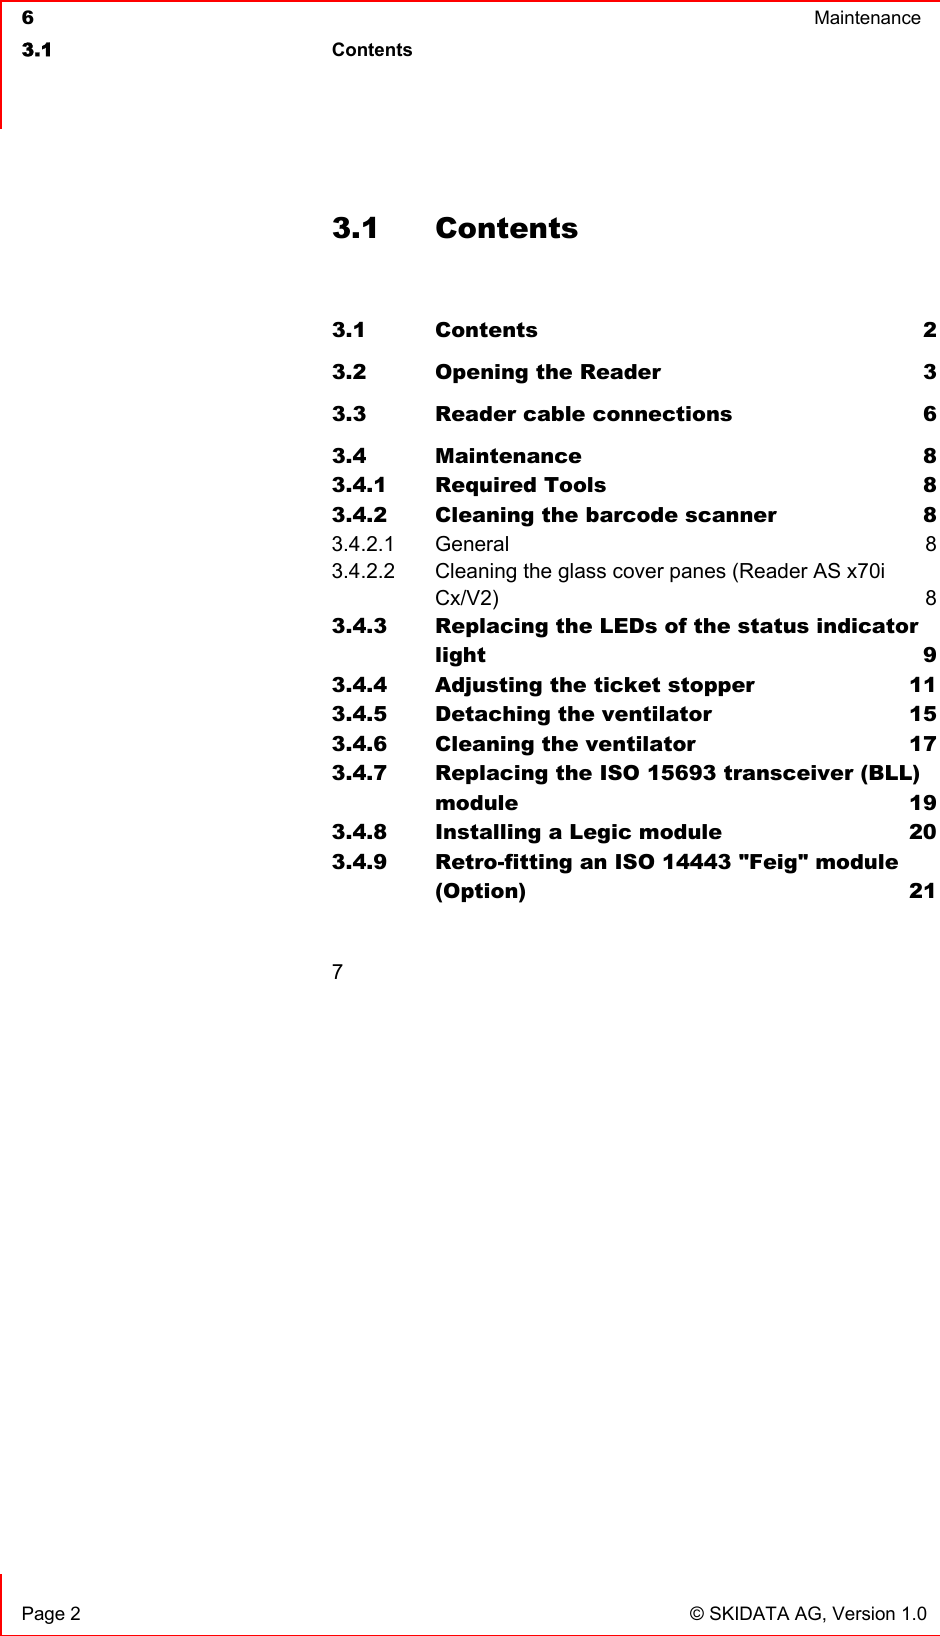  6  Maintenance  3.1 Contents    Page 2  © SKIDATA AG, Version 1.0 3.1 Contents  3.1 Contents 2 3.2 Opening the Reader  3 3.3 Reader cable connections  6 3.4 Maintenance 8 3.4.1 Required Tools  8 3.4.2 Cleaning the barcode scanner  8 3.4.2.1 General 8 3.4.2.2 Cleaning the glass cover panes (Reader AS x70i  Cx/V2) 8 3.4.3 Replacing the LEDs of the status indicator light 9 3.4.4 Adjusting the ticket stopper  11 3.4.5 Detaching the ventilator  15 3.4.6 Cleaning the ventilator  17 3.4.7 Replacing the ISO 15693 transceiver (BLL) module 19 3.4.8 Installing a Legic module  20 3.4.9 Retro-fitting an ISO 14443 &quot;Feig&quot; module  (Option) 21  7 